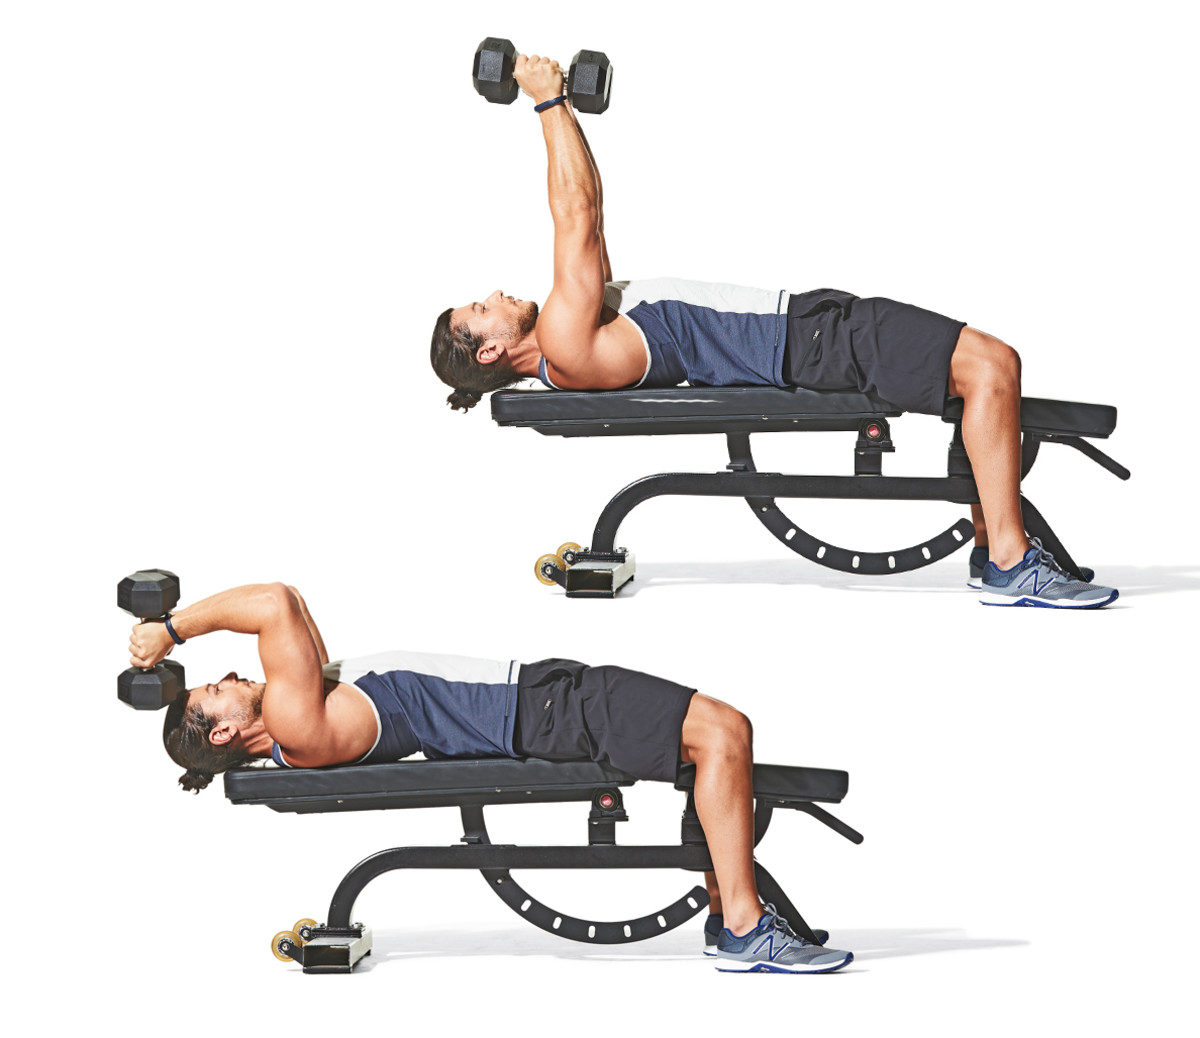 Seated Dumbbell Triceps Press: 25 reps.